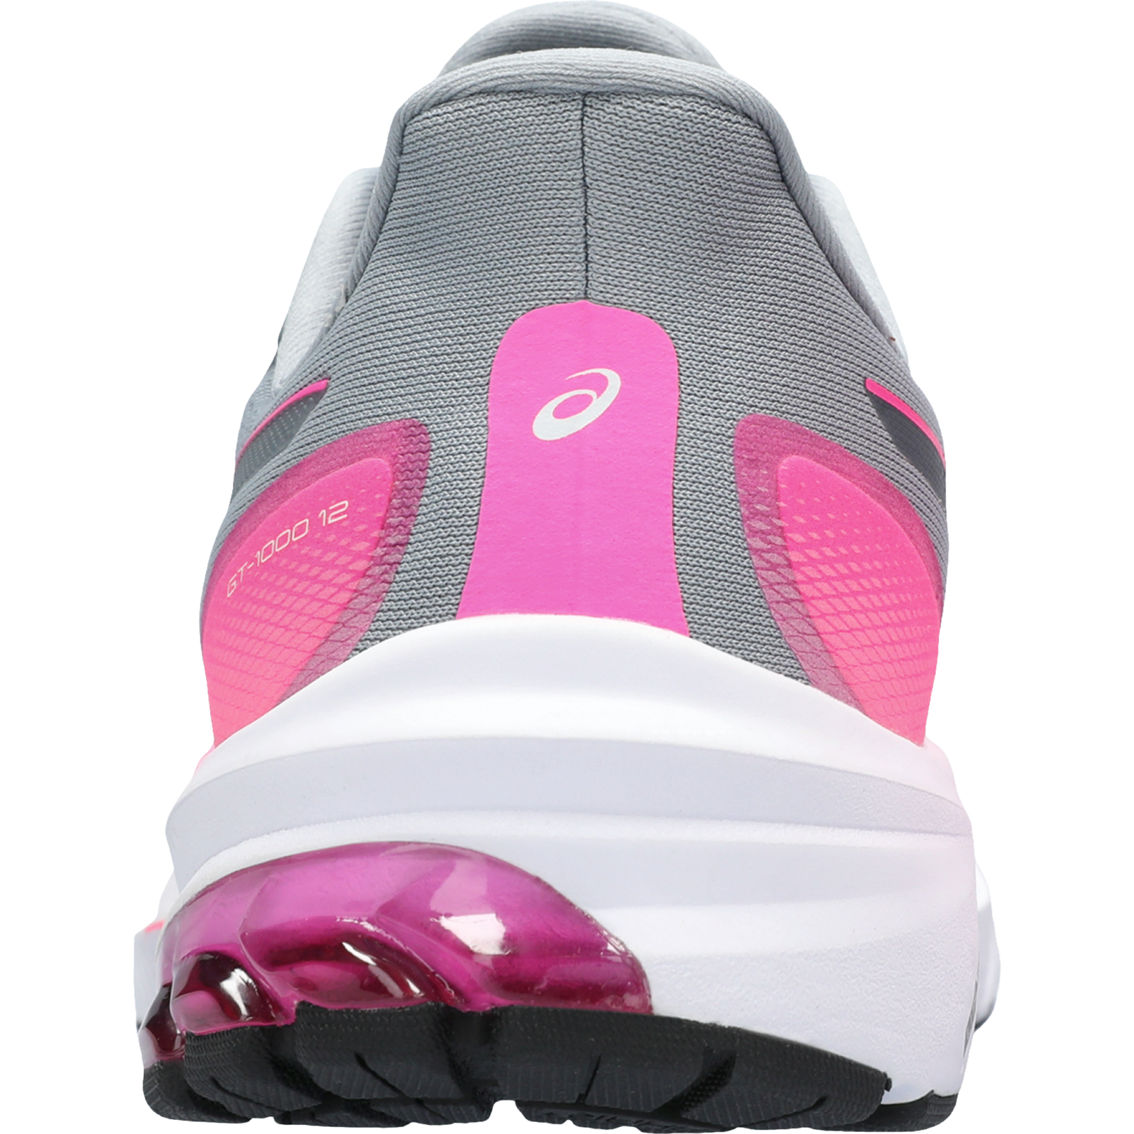 ASICS Women's GT-1000 12 Running Shoes - Image 5 of 5